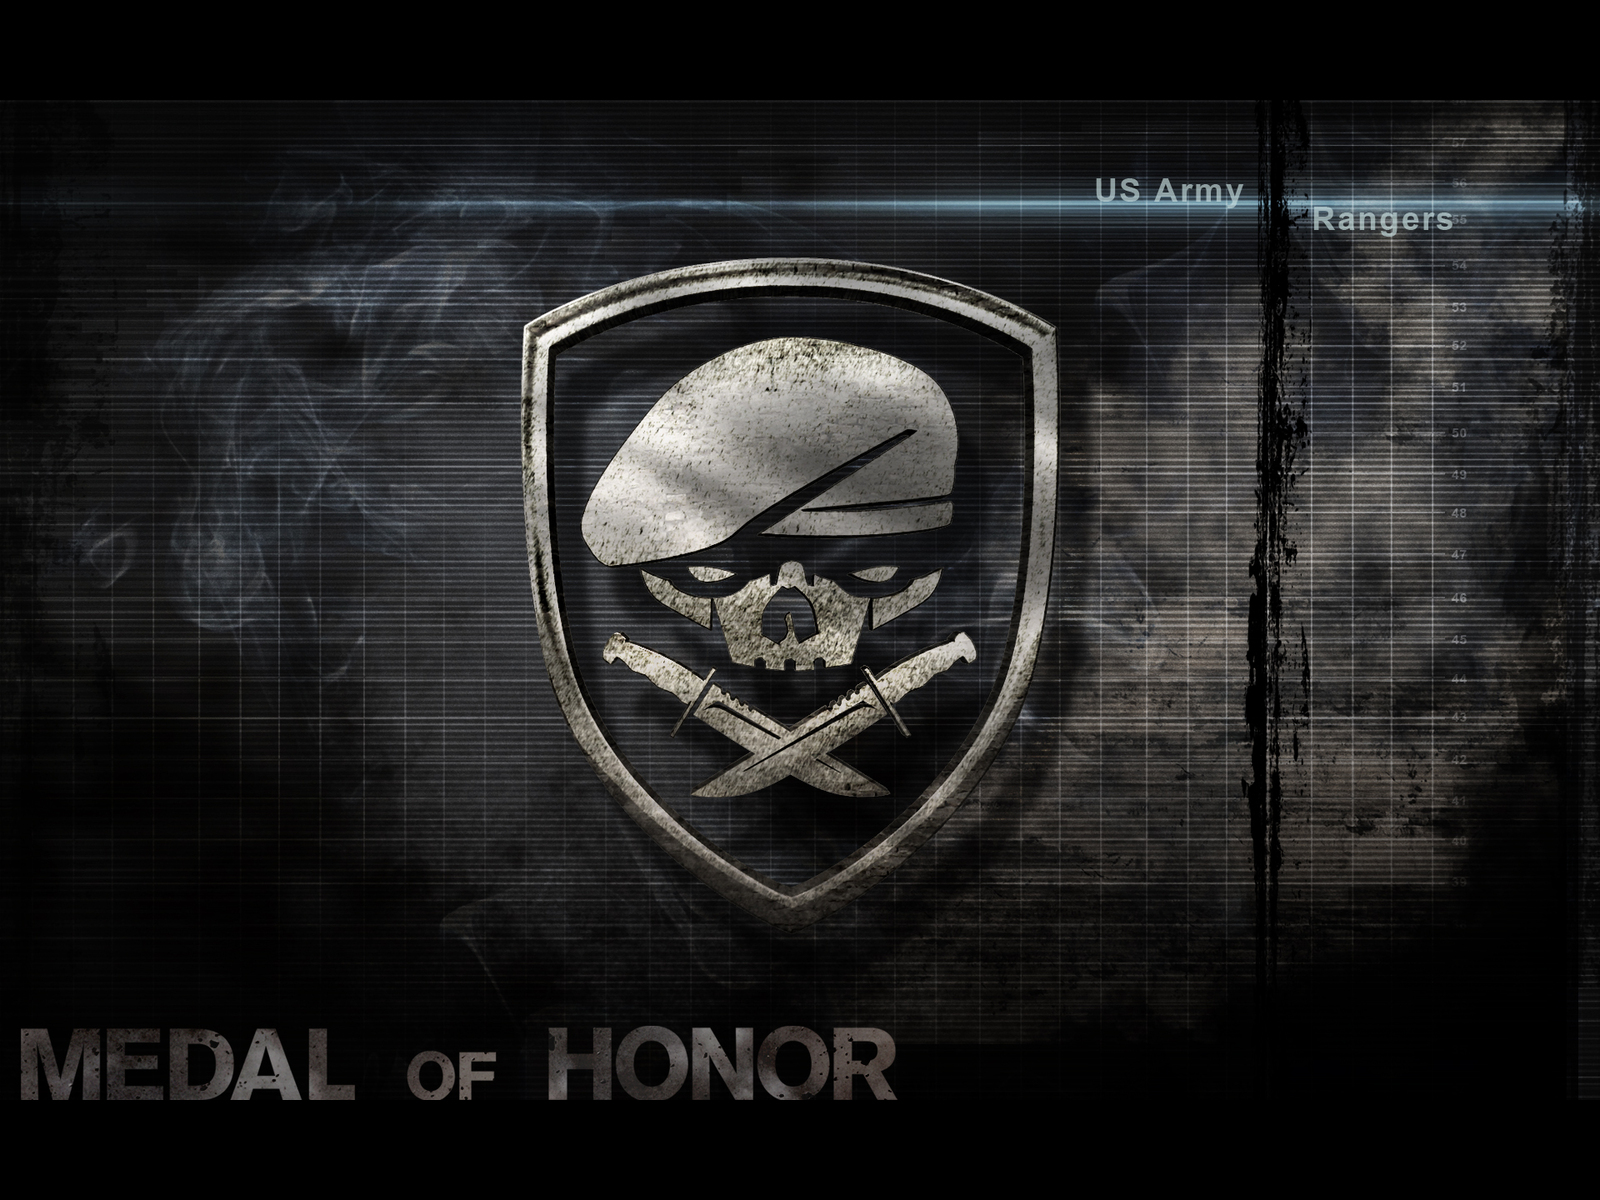 Video Game Medal Of Honor 1600x1200